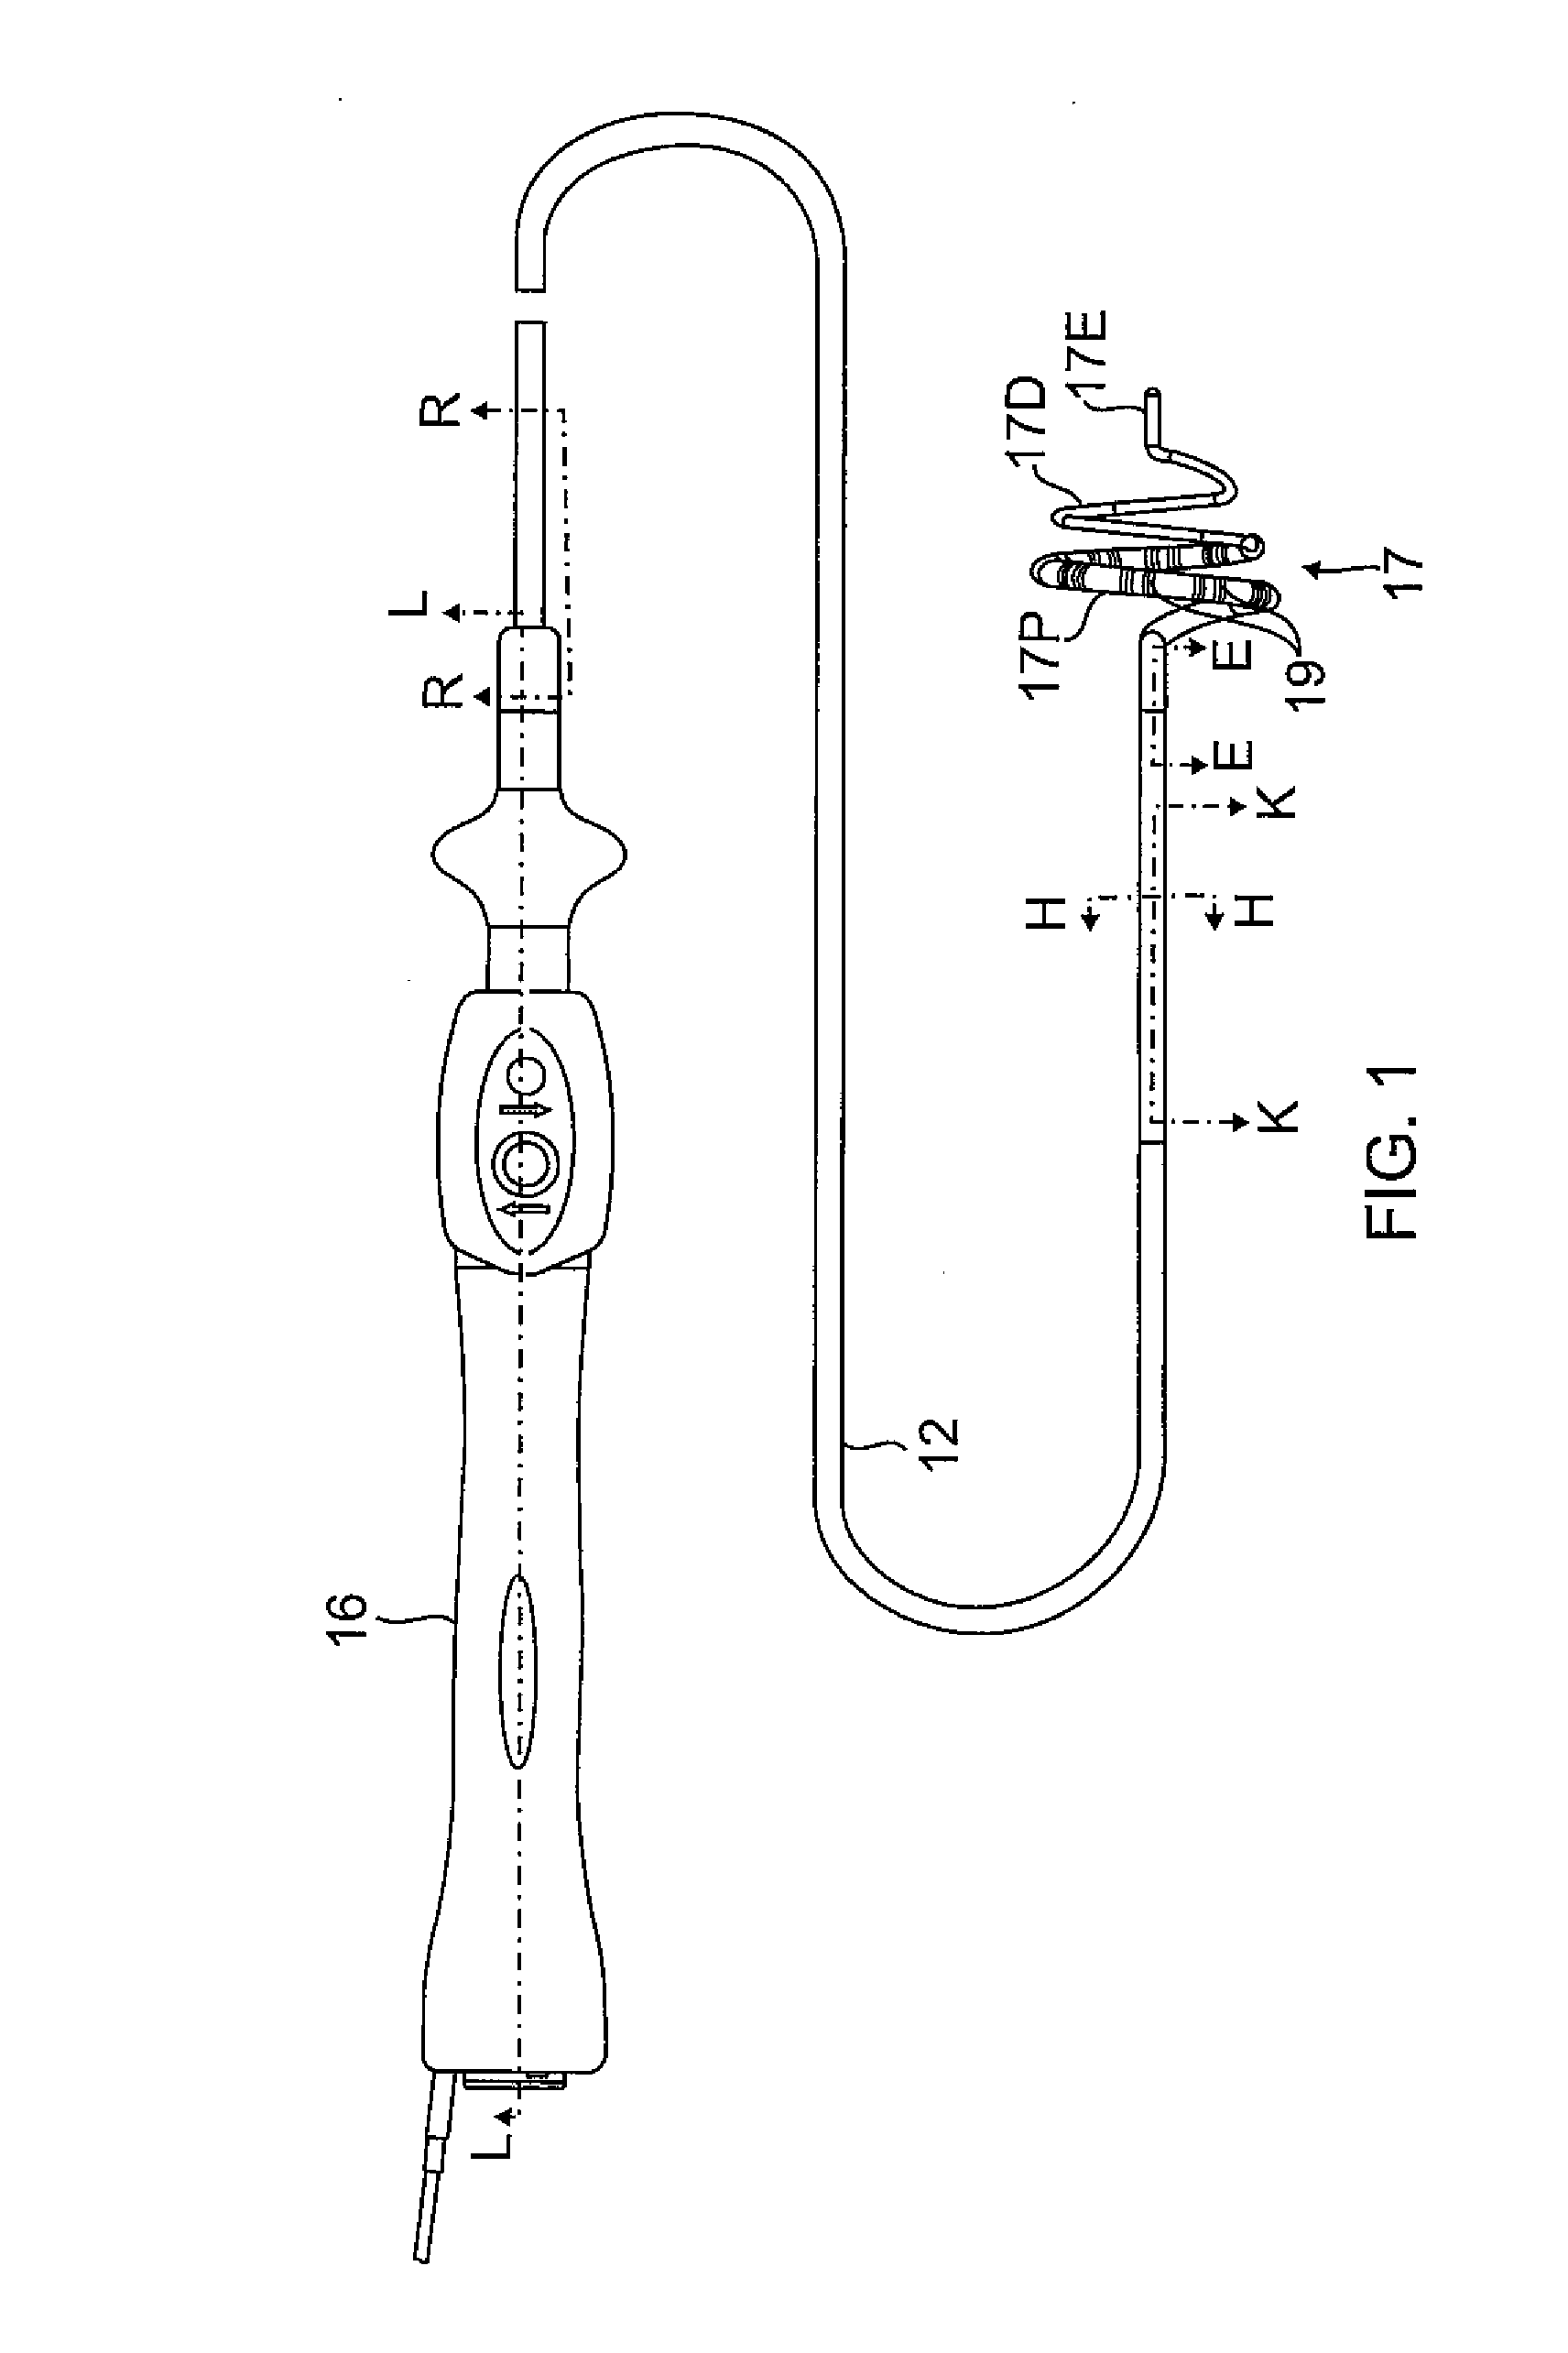 Catheter with soft distal tip for mapping and ablating tubular region